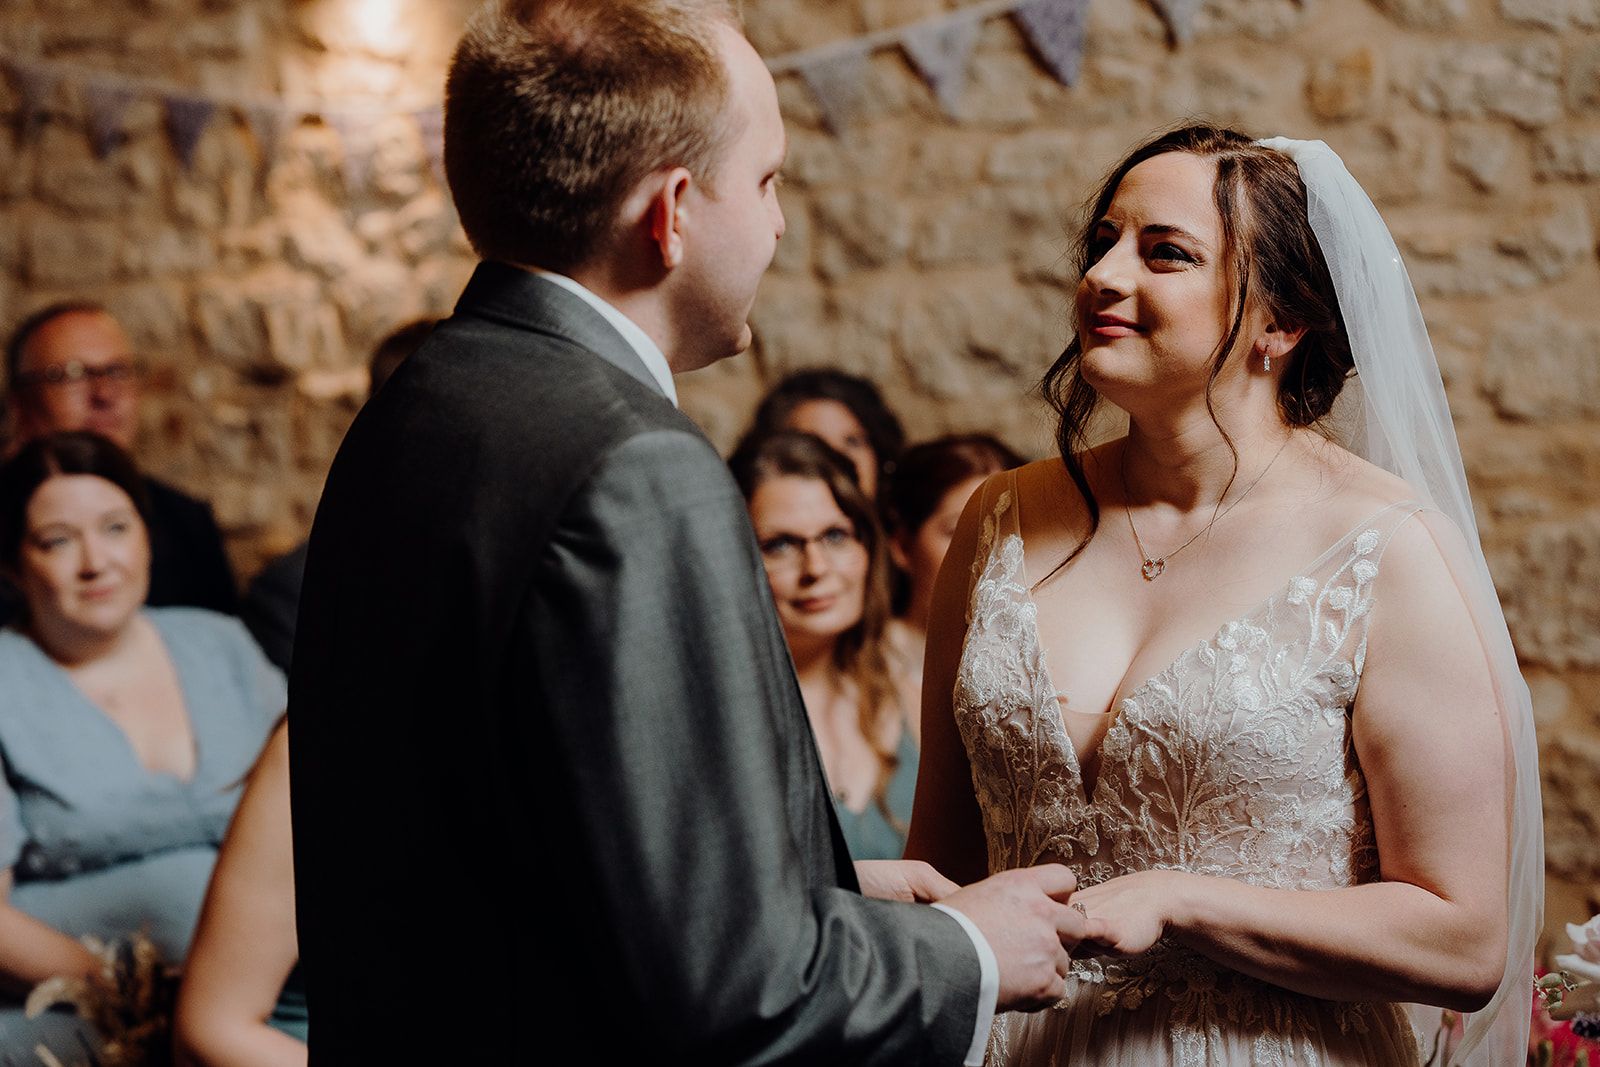 Georgie and James exchanging wedding rings during their wedding ceremony at Huntsmill Farm. Photo thanks to Sam and Steve Photography.